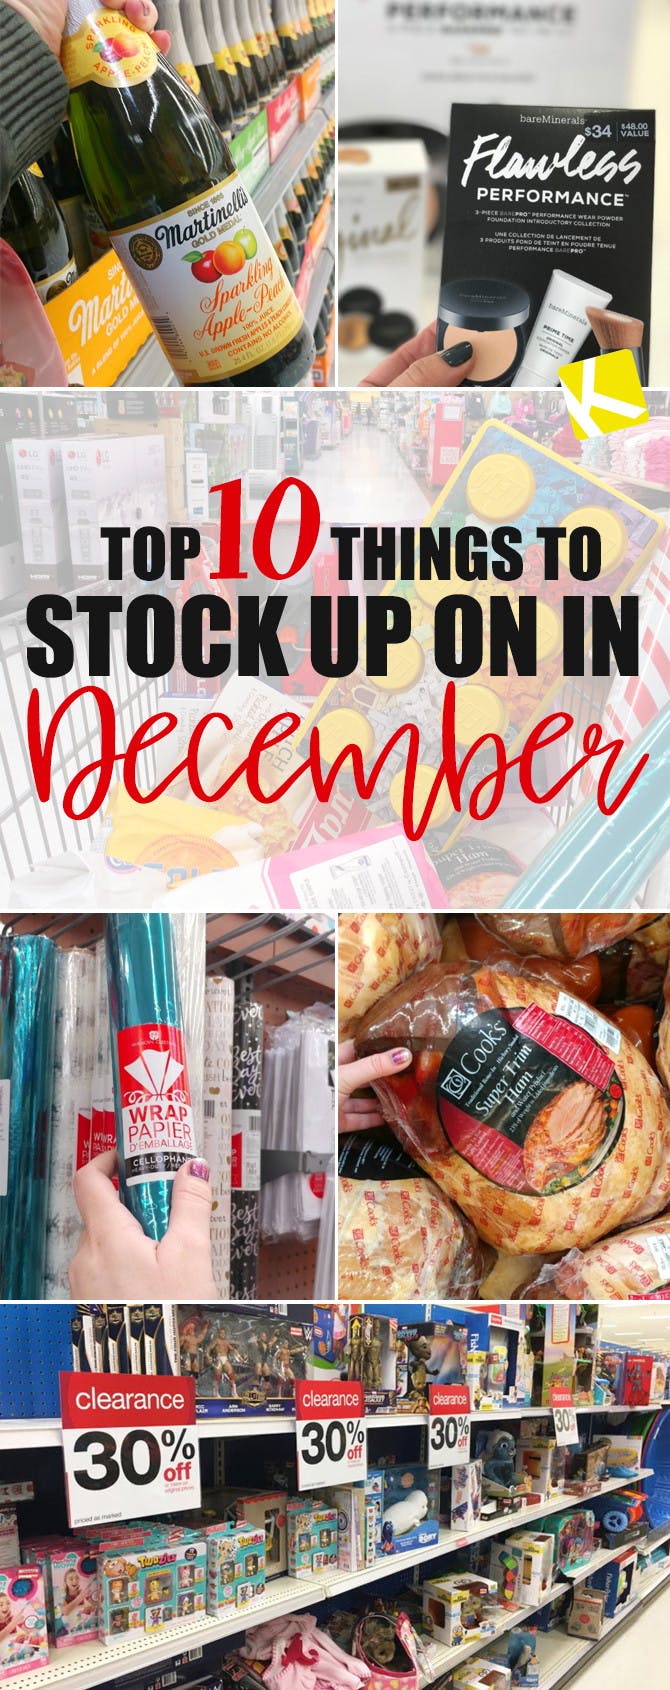 What to Stock Up on in December: Top 10 Things to Buy